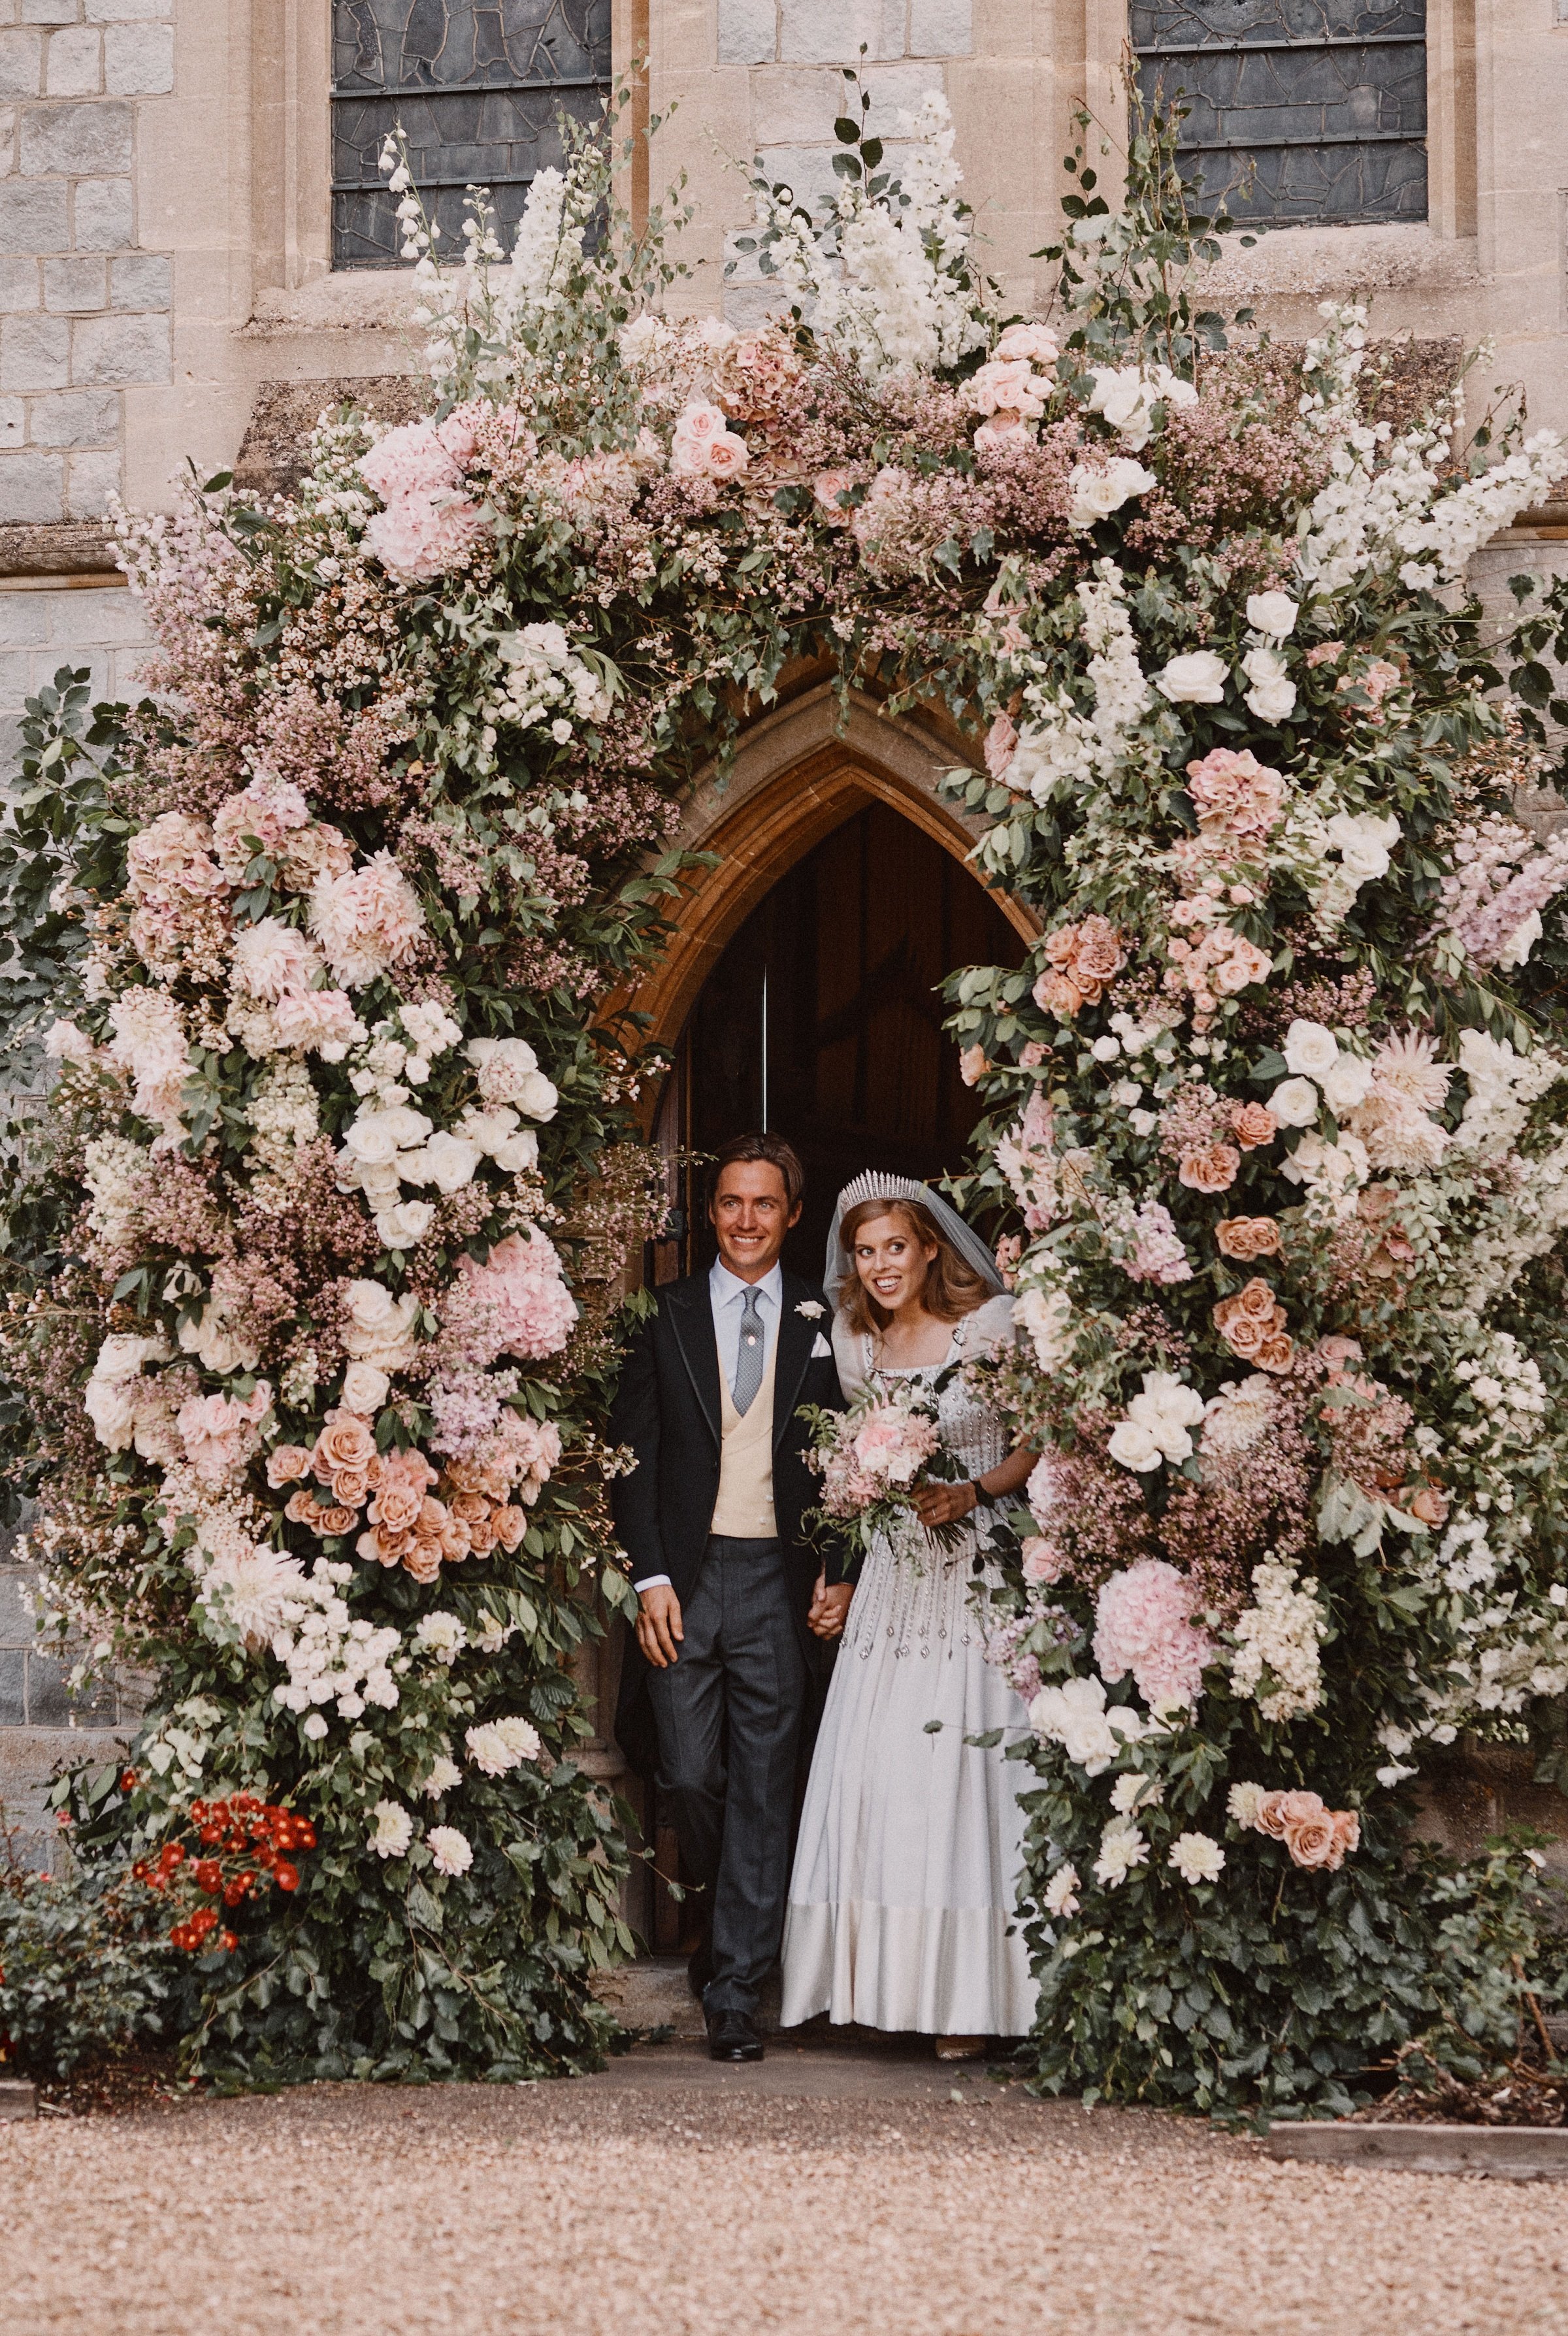 Princess Beatrice and Edoardo Mapelli Mozzi leaving The Royal Chapel of All Saints at Royal Lodge, Windsor after their wedding on July 17, 2020, in Windsor, England. | Source: Getty Images.